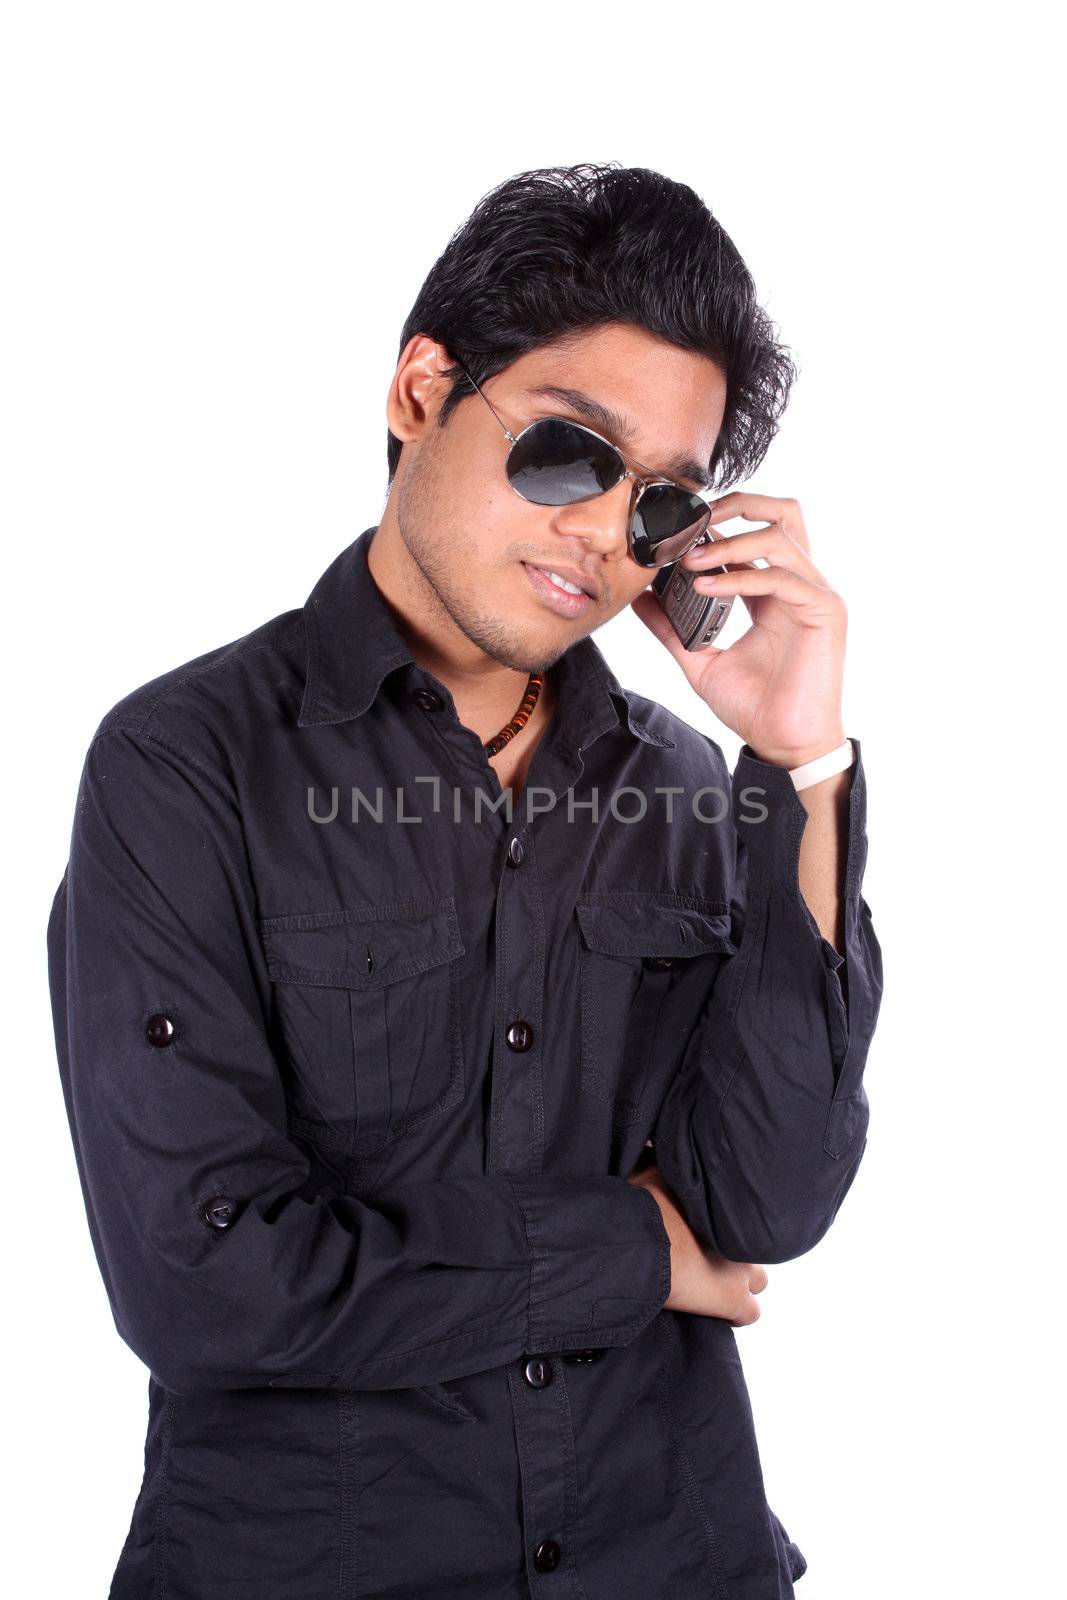 A young Indian man wearing sunglasses talking on the phone, on white studio background.